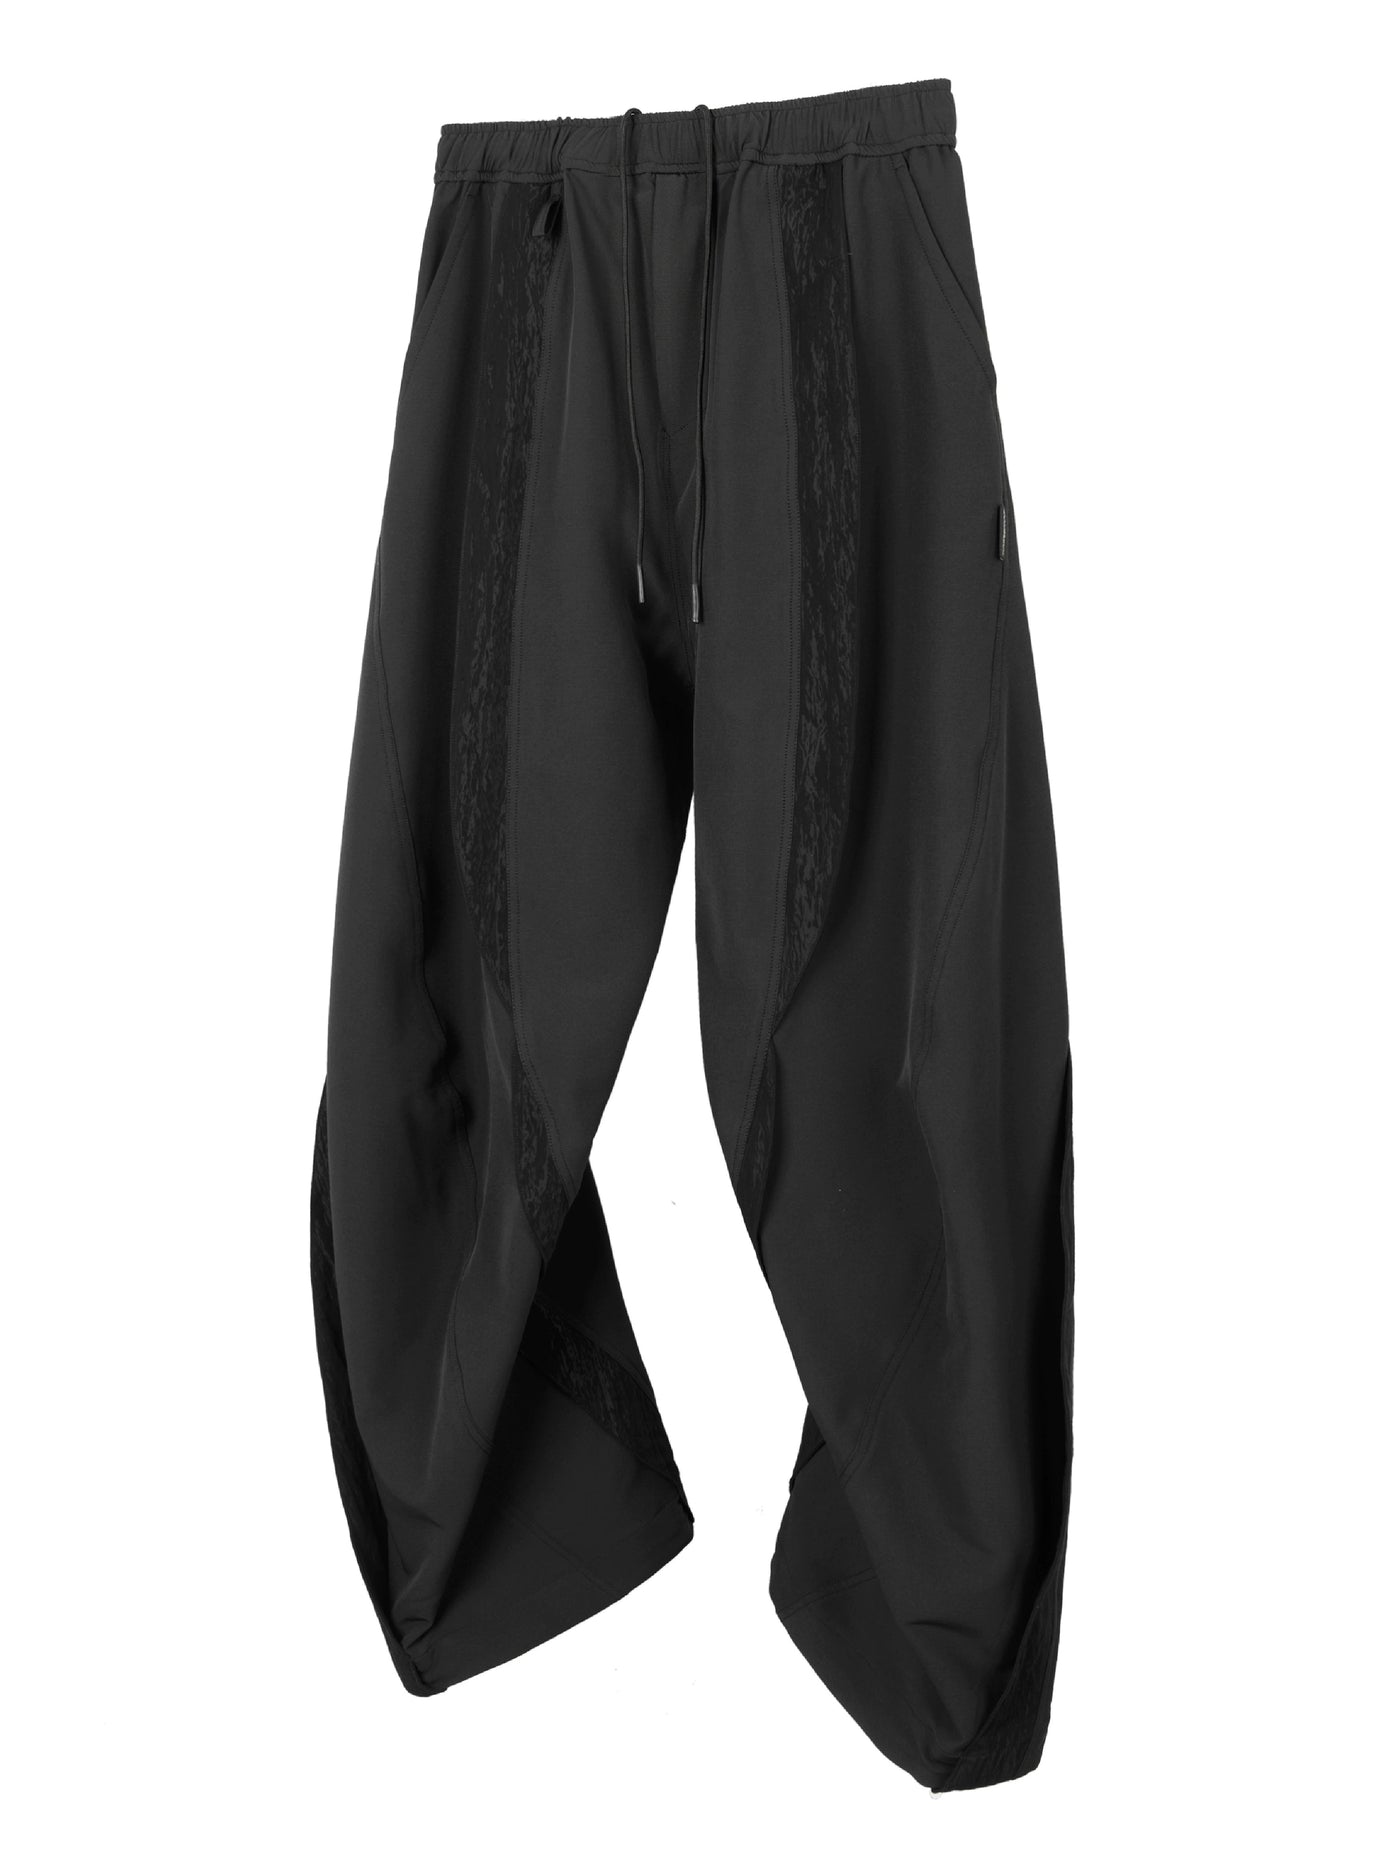 Swirling Contrast Line Track Pants Korean Street Fashion Pants By Symbiotic Effect Shop Online at OH Vault